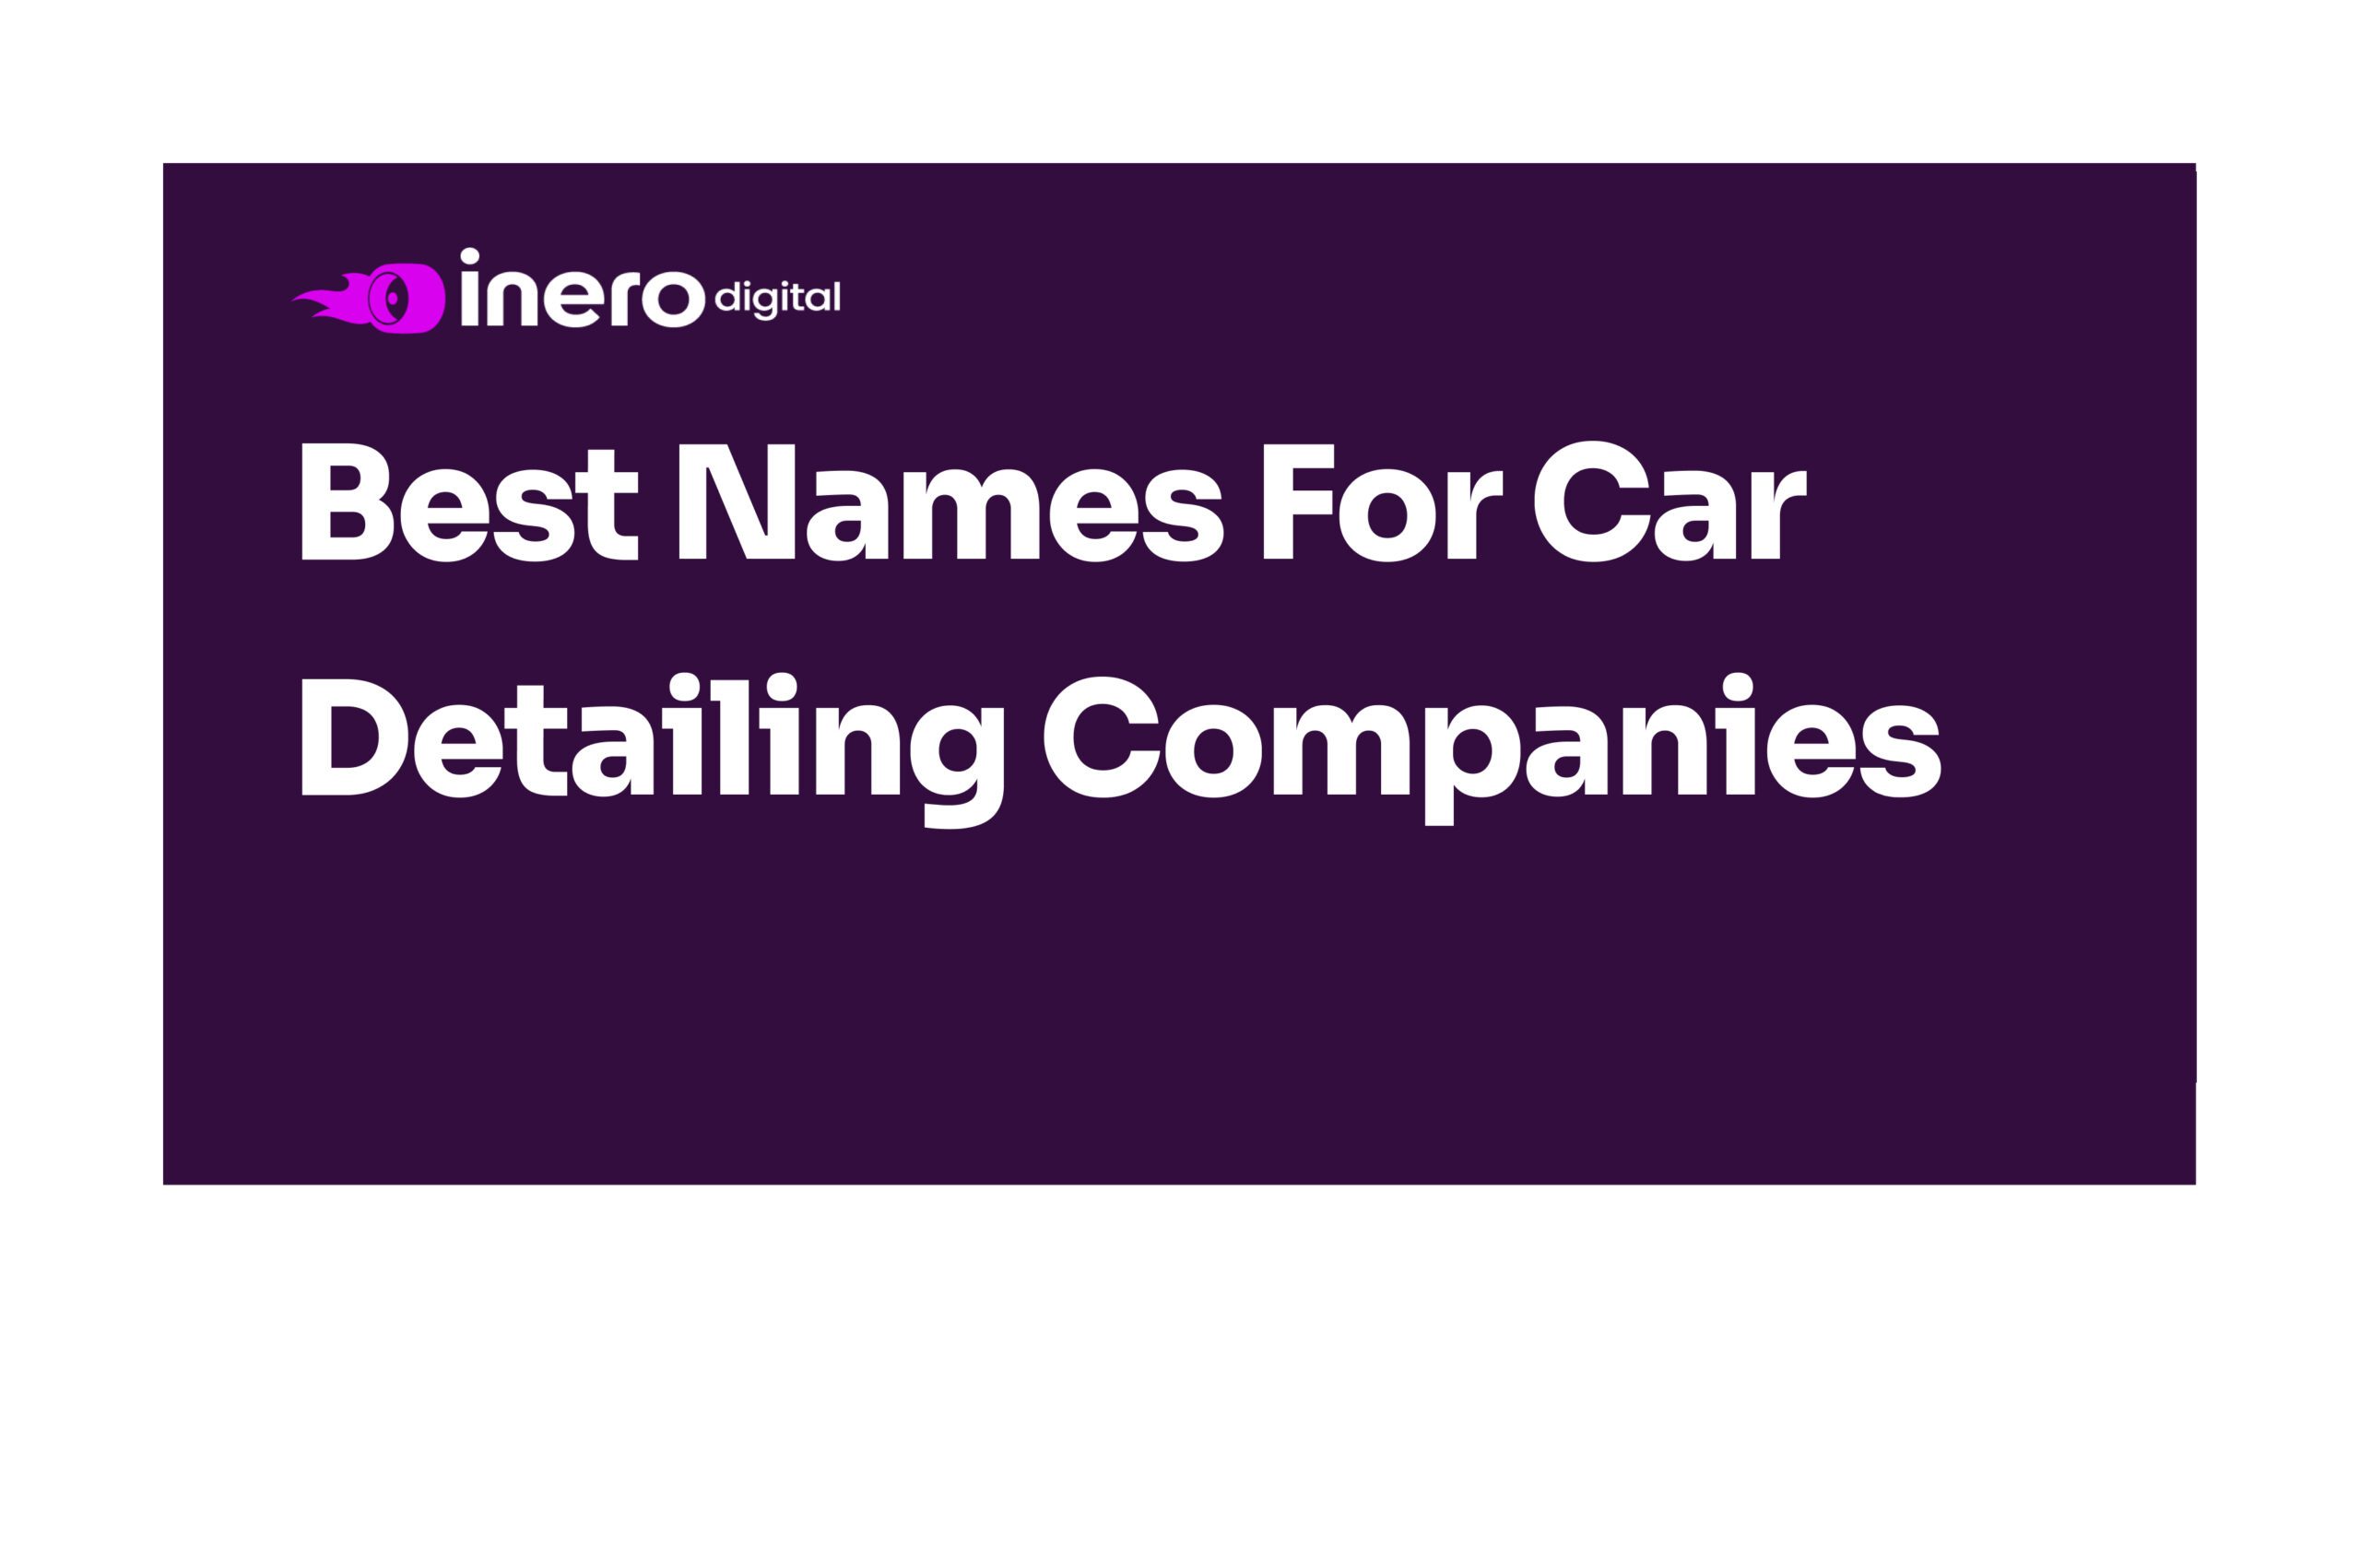 Best Names for Car Detailing Companies